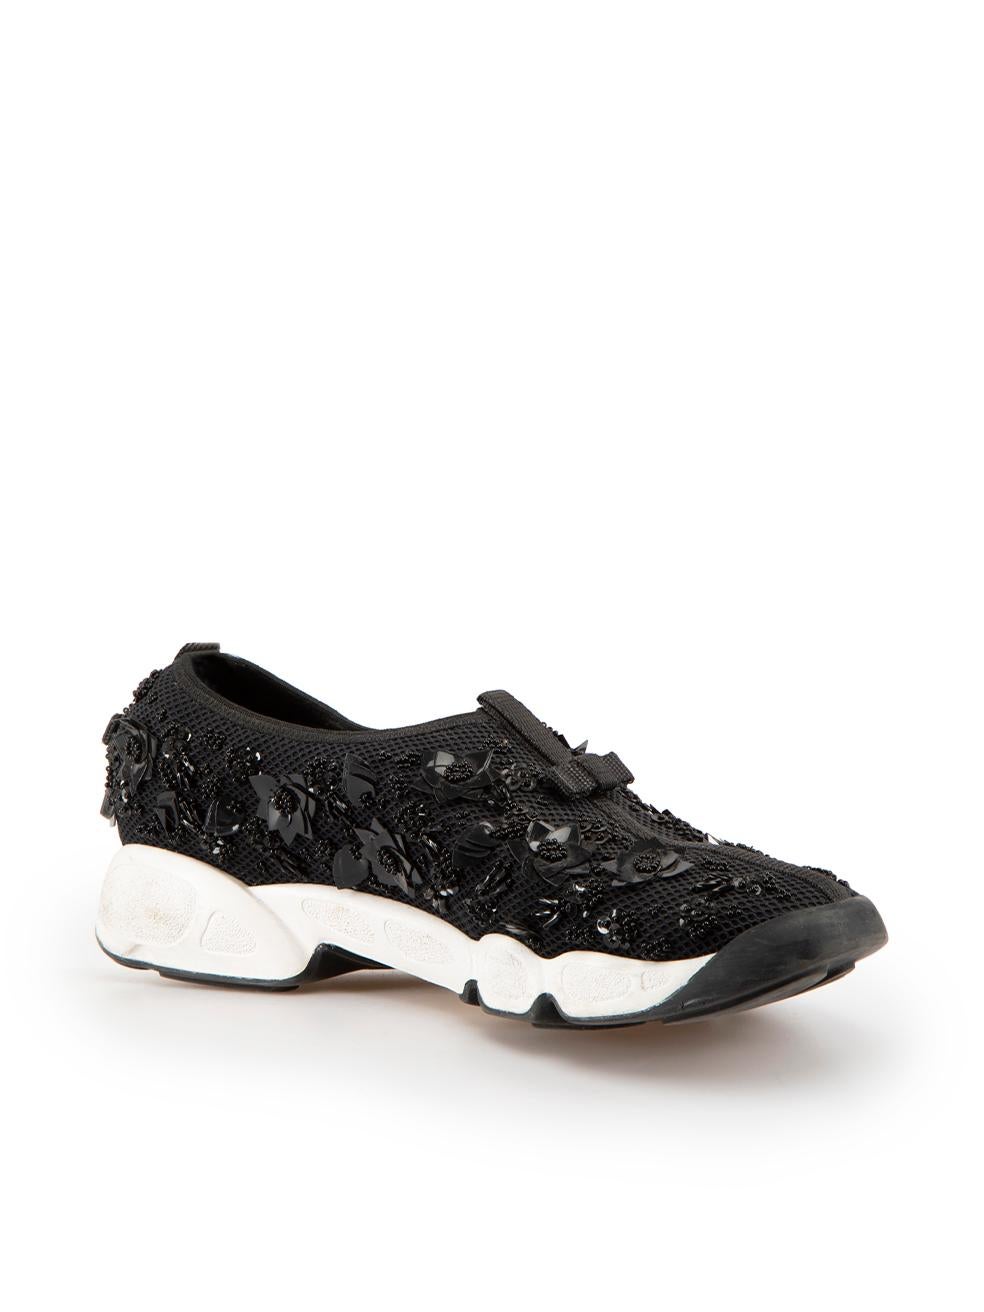 CONDITION is Very good. Minimal wear to trainers is evident. Minimal wear to overall rubber sole where stains and scratches is evident on both shoes on this used Dior designer resale item.
  
Details
Dior Fusion
Black
Cloth textile
Trainers
Floral